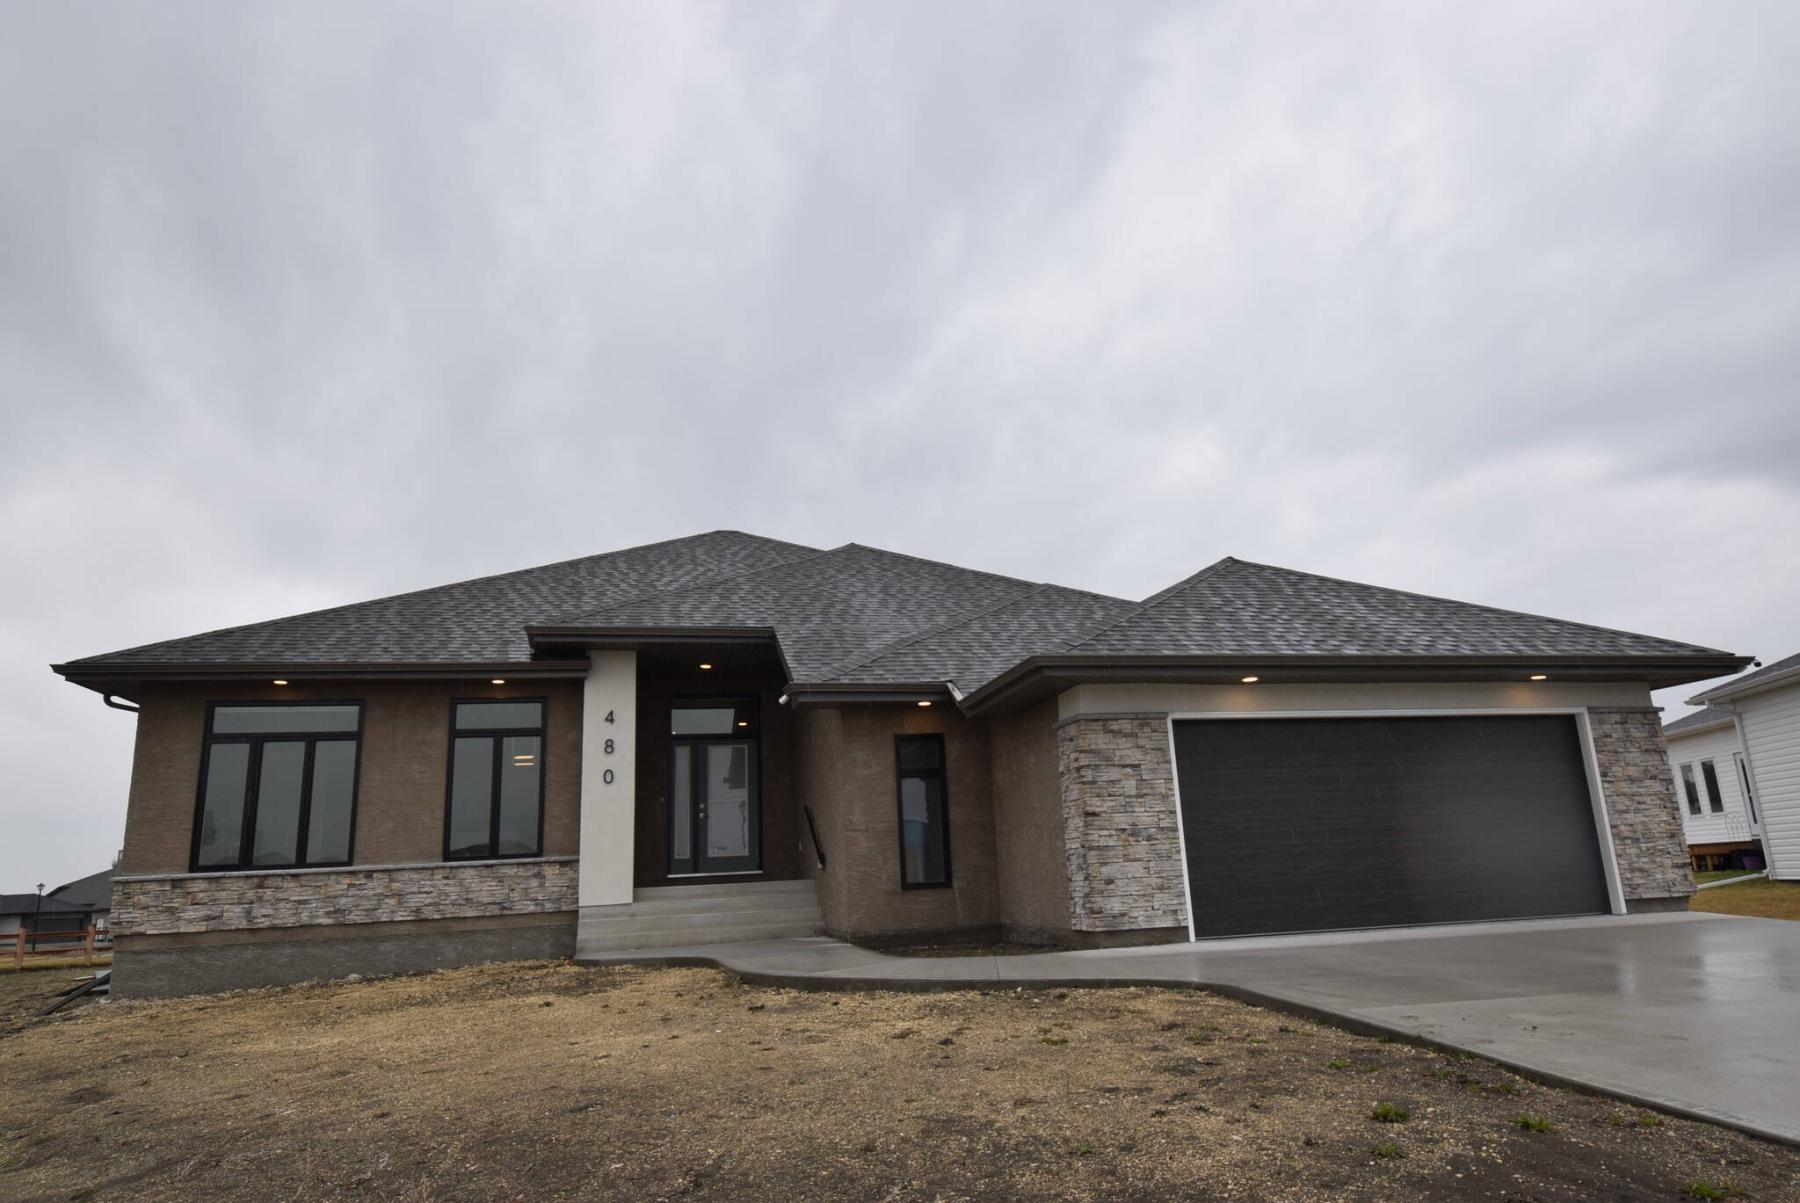  <p>PHOTOS BY Todd Lewys / Winnipeg Free Press</p>
                                <p>This large bungalow has plenty of curb appeal courtesy of an upgraded stone and acrylic stucco exterior.</p> 